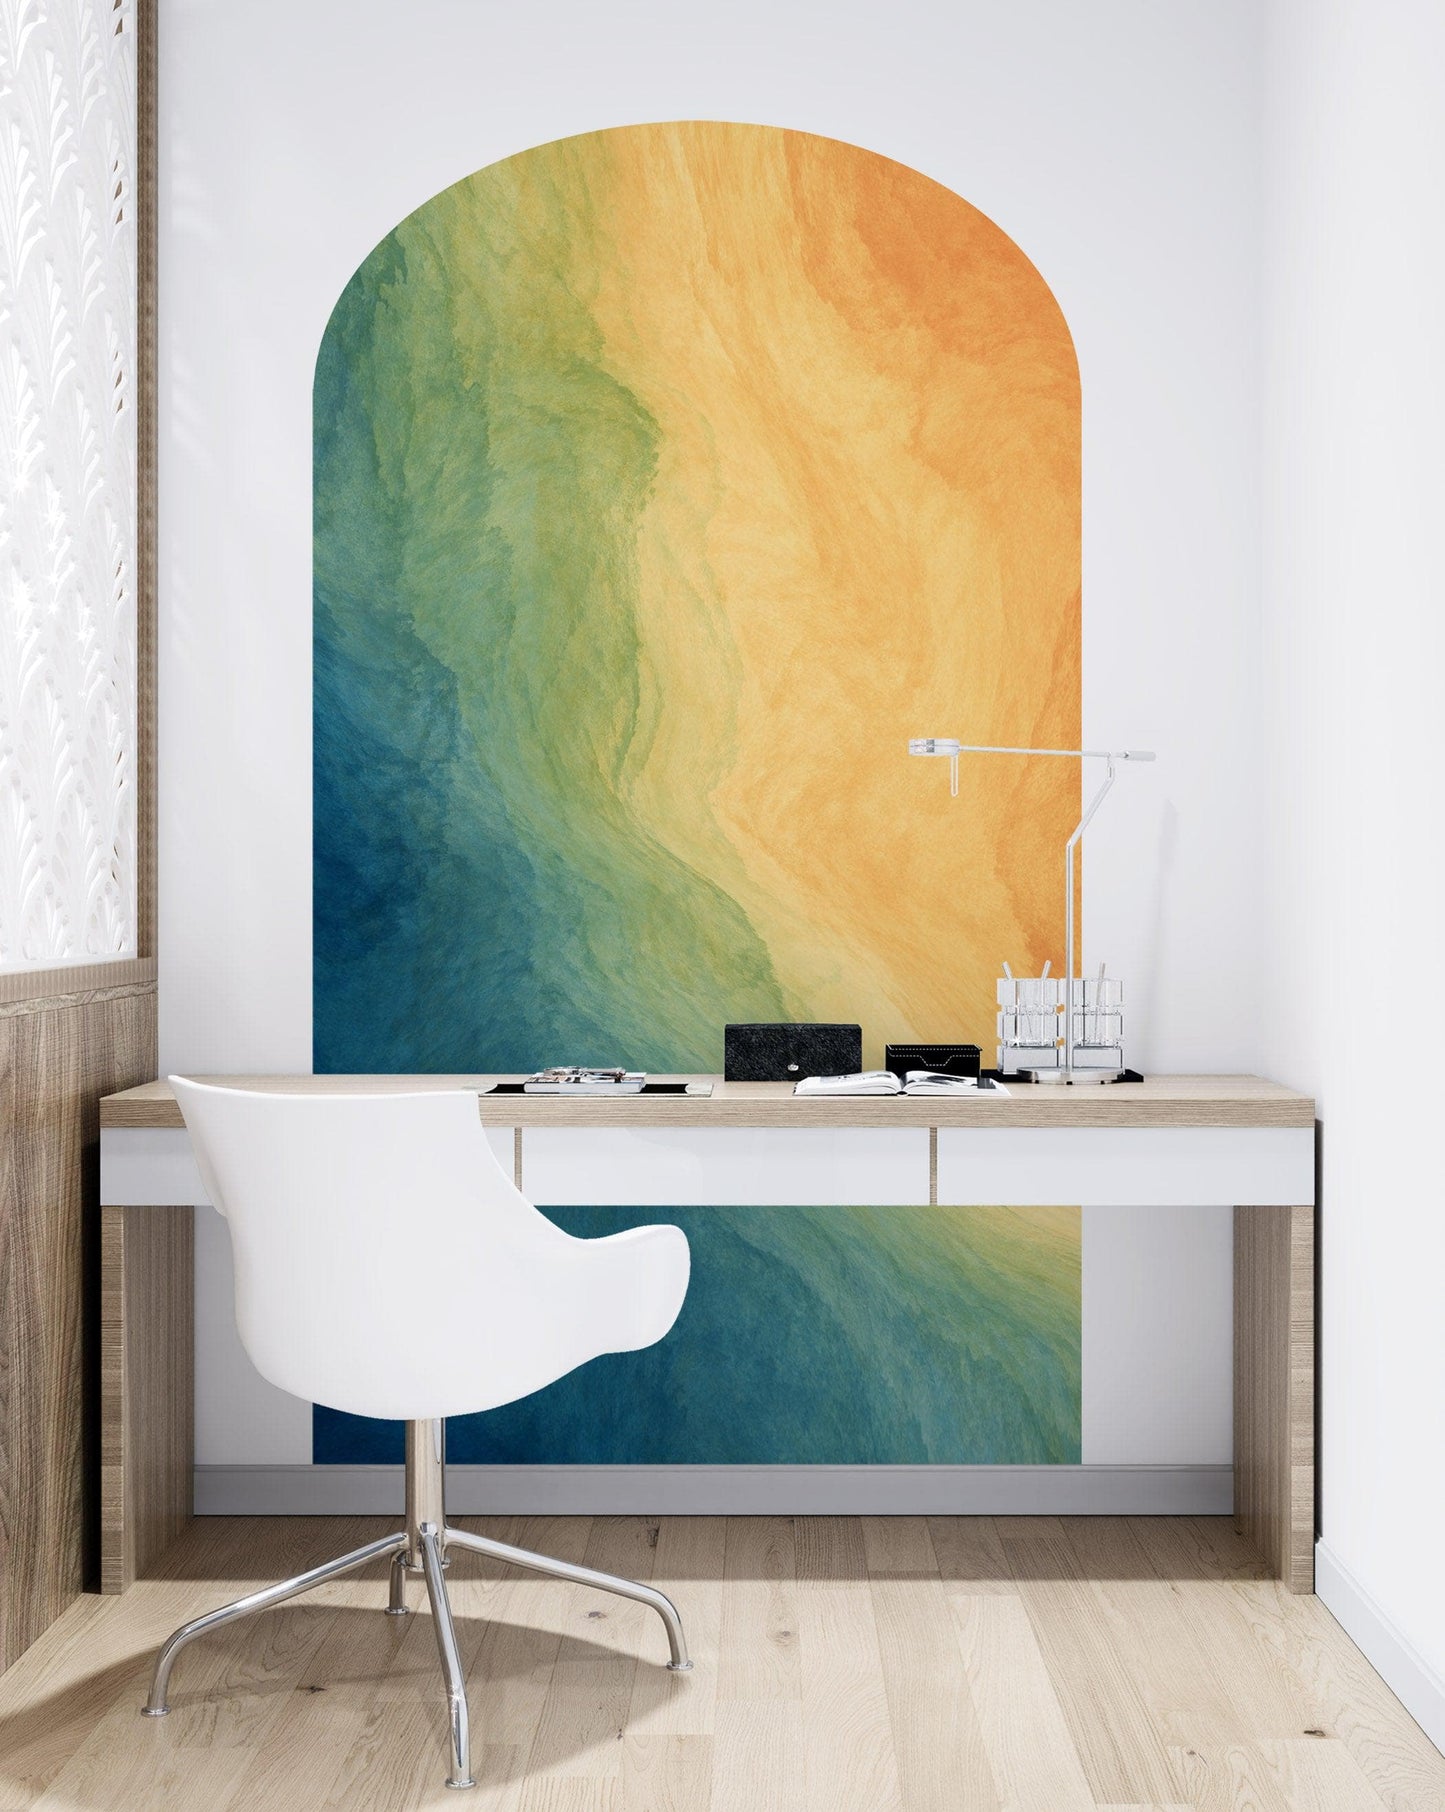 Arch Wall Decal. Colorful Liquid Fluid Watercolor Arch Peel and Stick Wall Decal. Removable Graphic. #6294